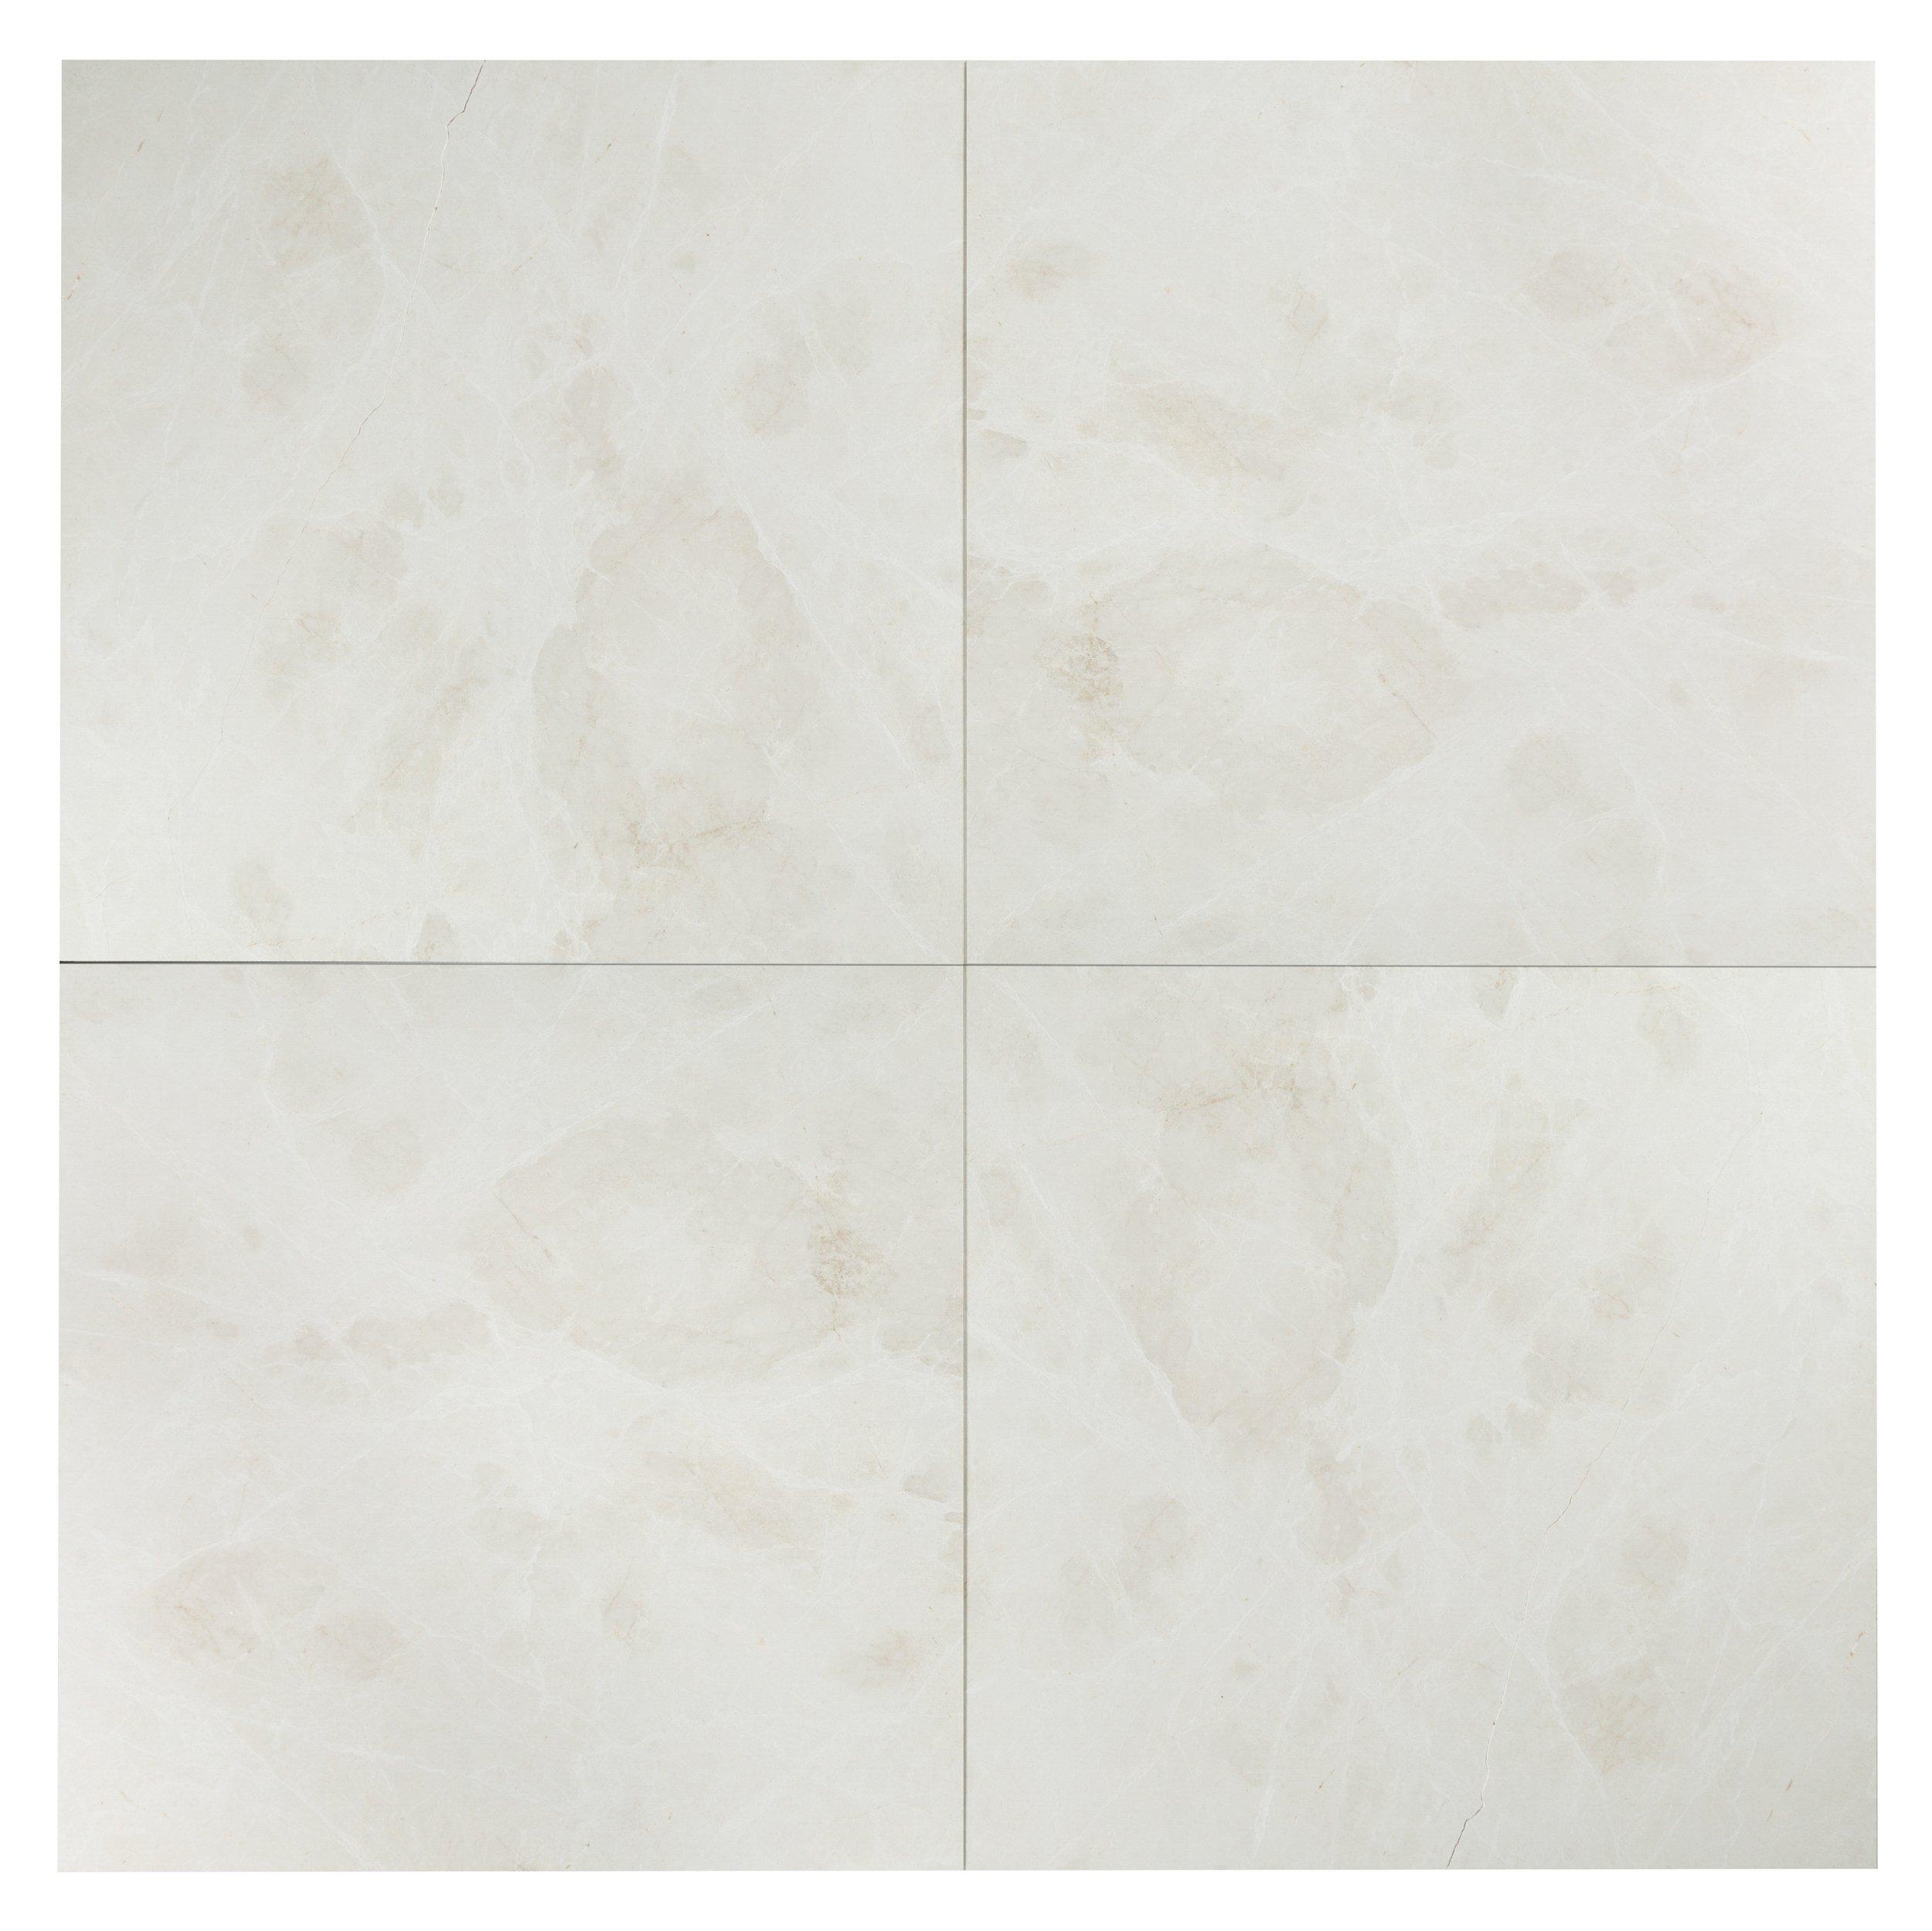 French Vanilla Polished Marble Tile - 48 x 48 - 100435742 | Floor and Decor